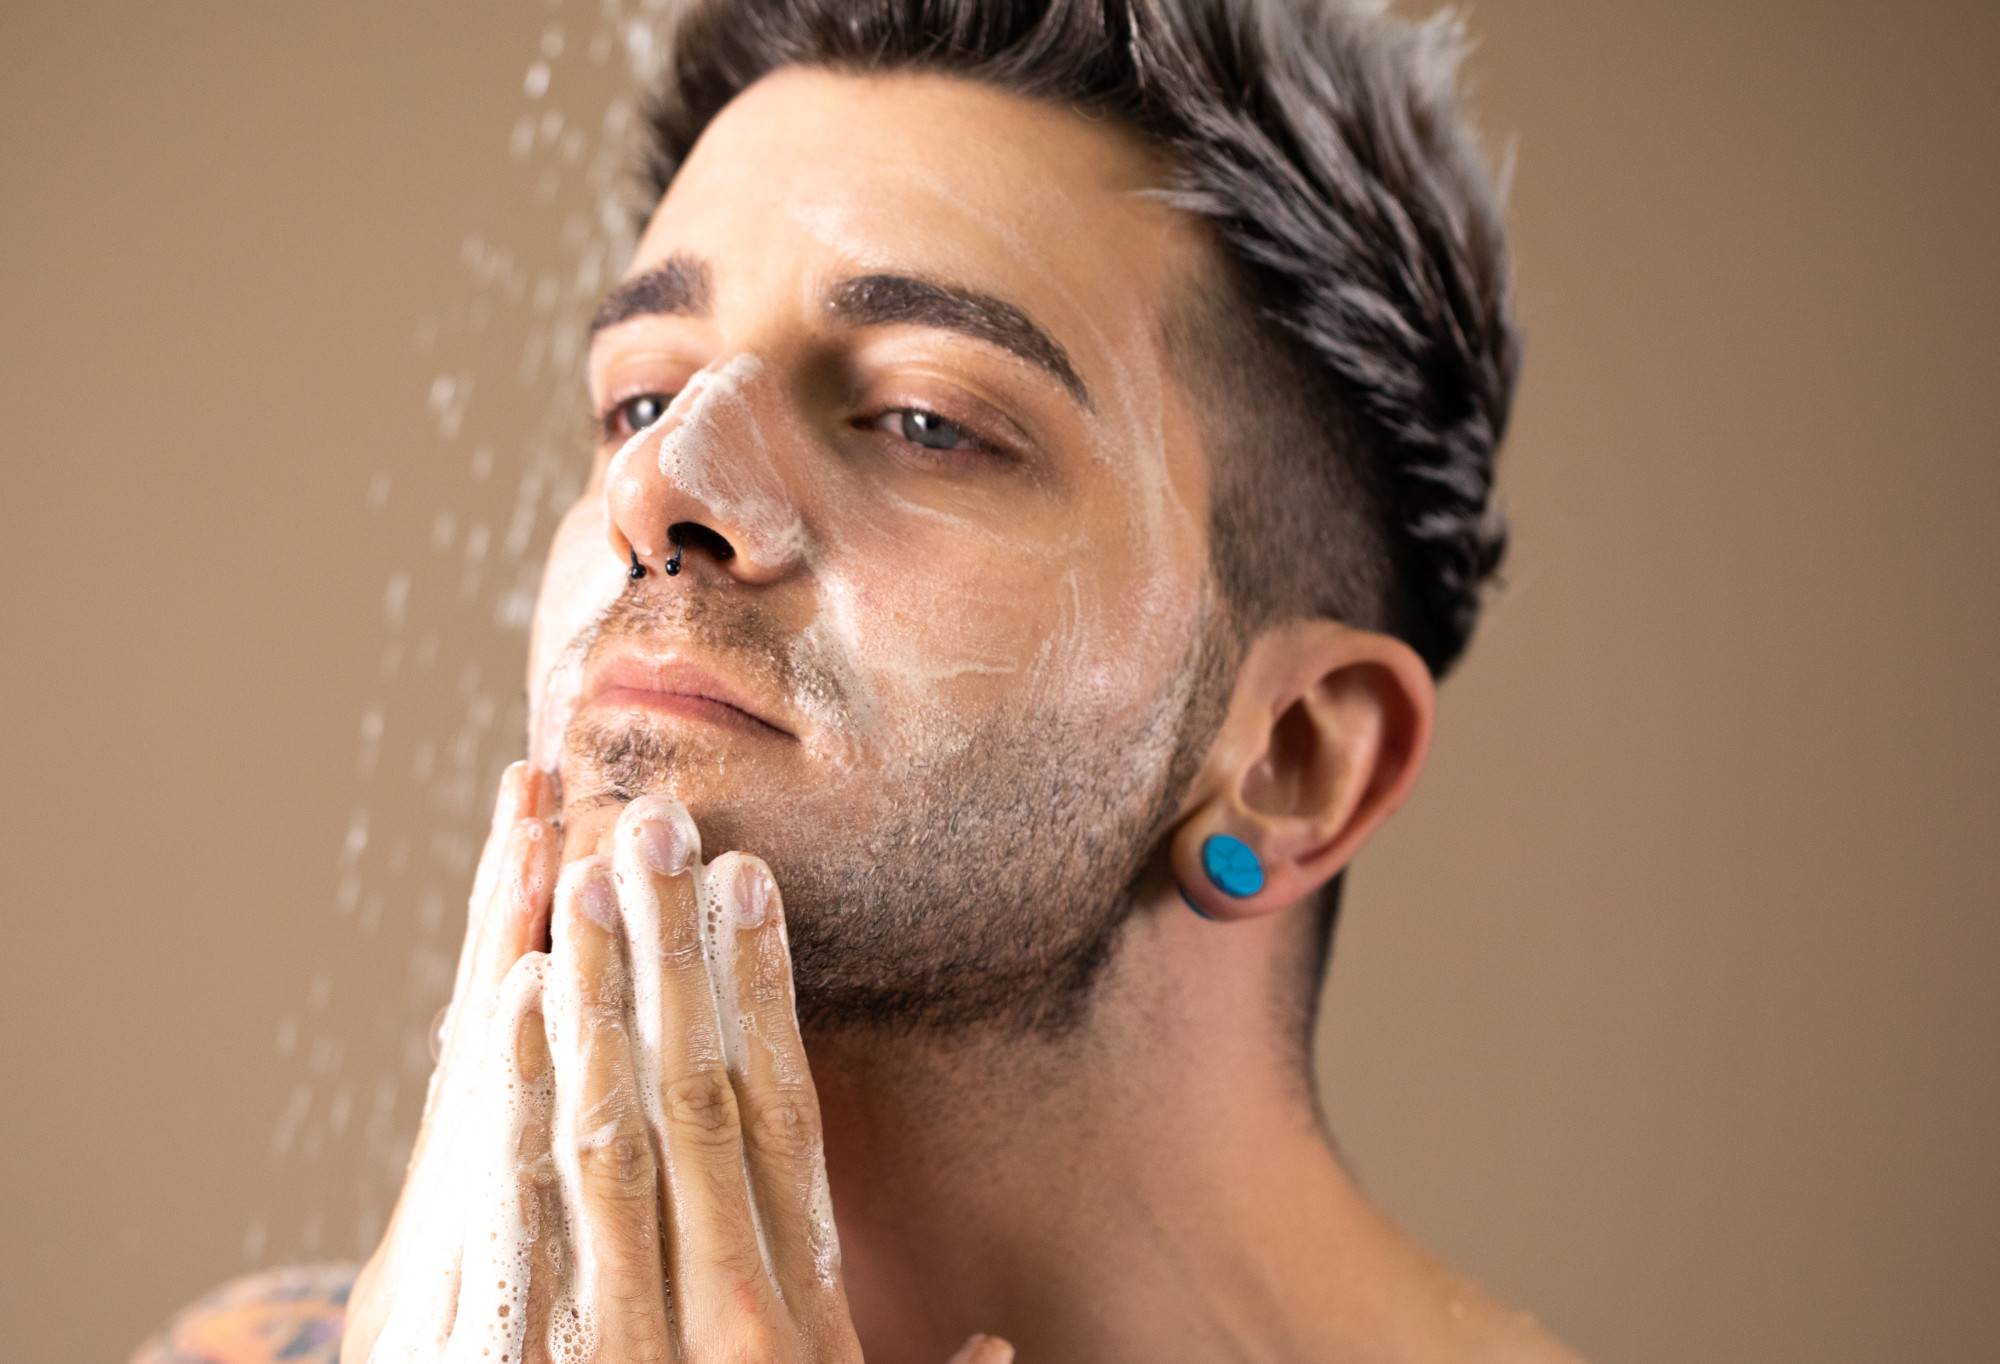 A bearded person's face is covered in whiteish soap suds, which are being rubbed into the chin with both hands.